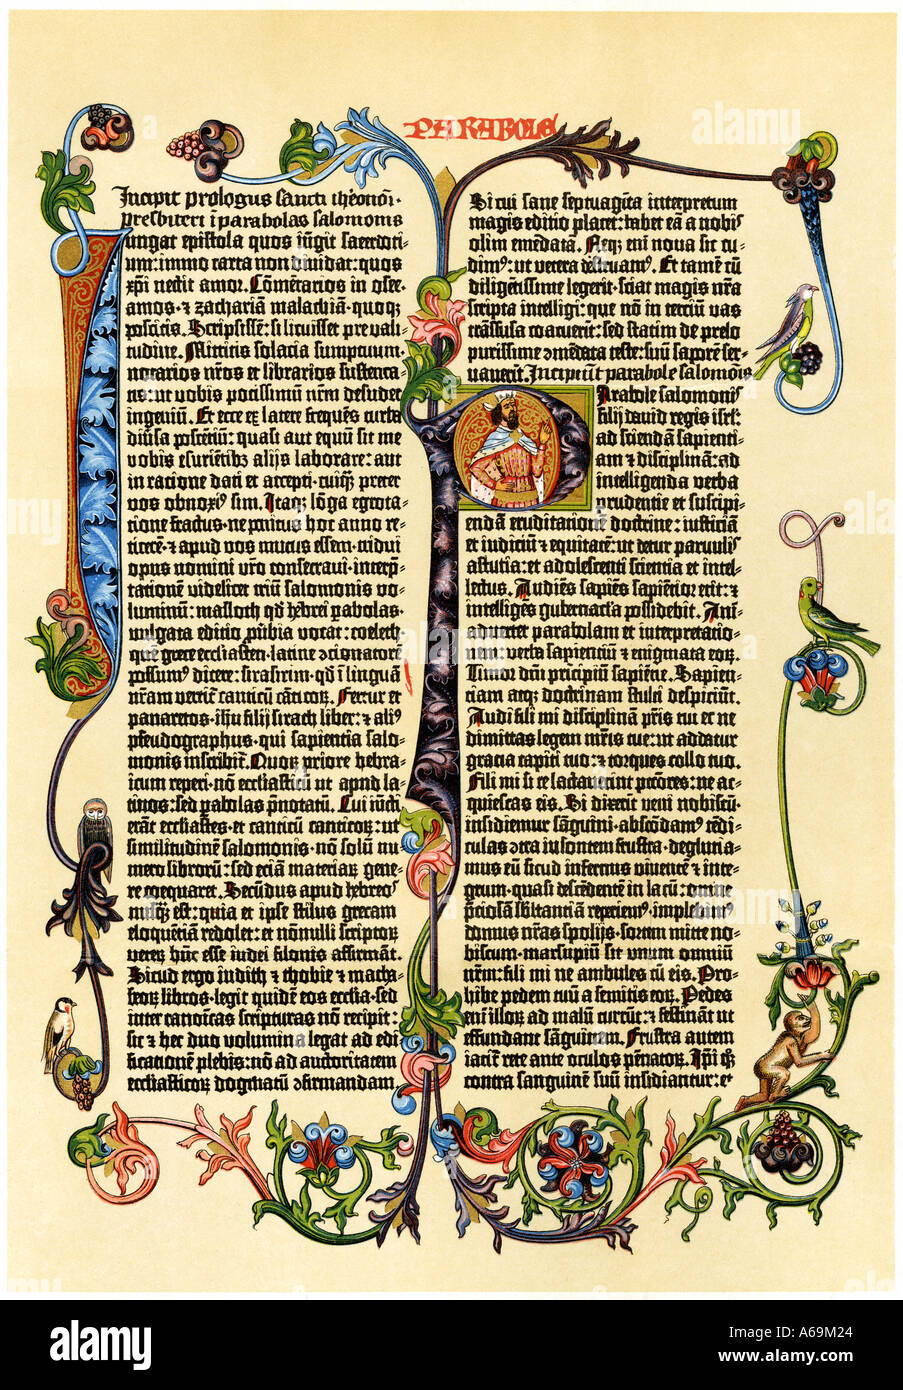 Page of Gutenberg s 42 line Bible printed in the 1450 s probably the first use of moveable type. Color lithograph Stock Photo